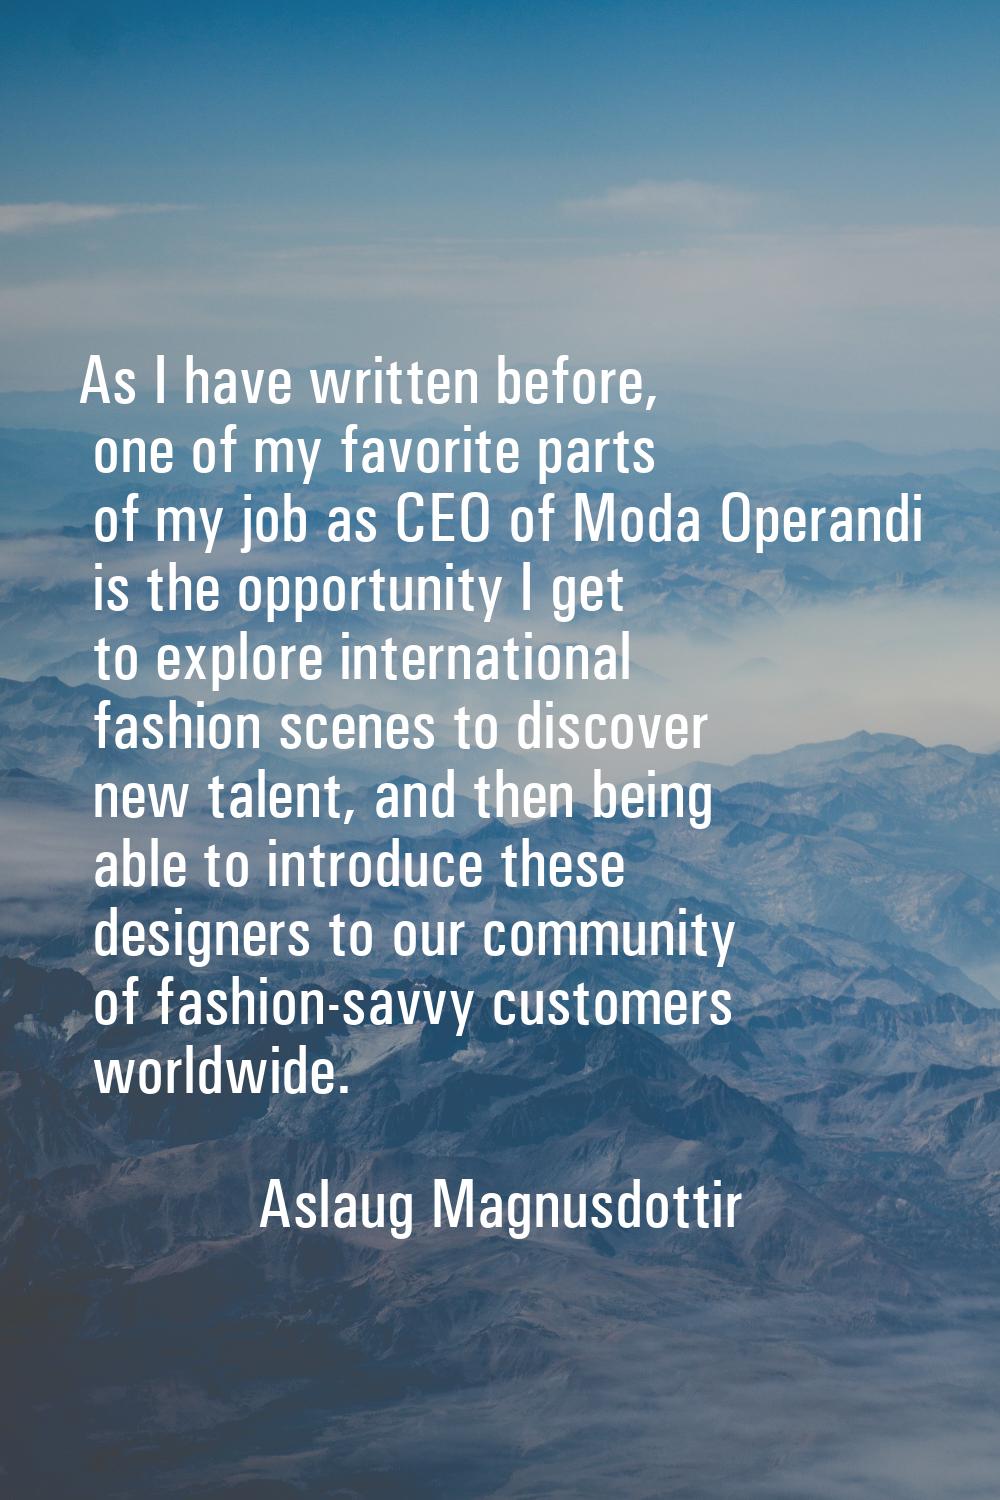 As I have written before, one of my favorite parts of my job as CEO of Moda Operandi is the opportu